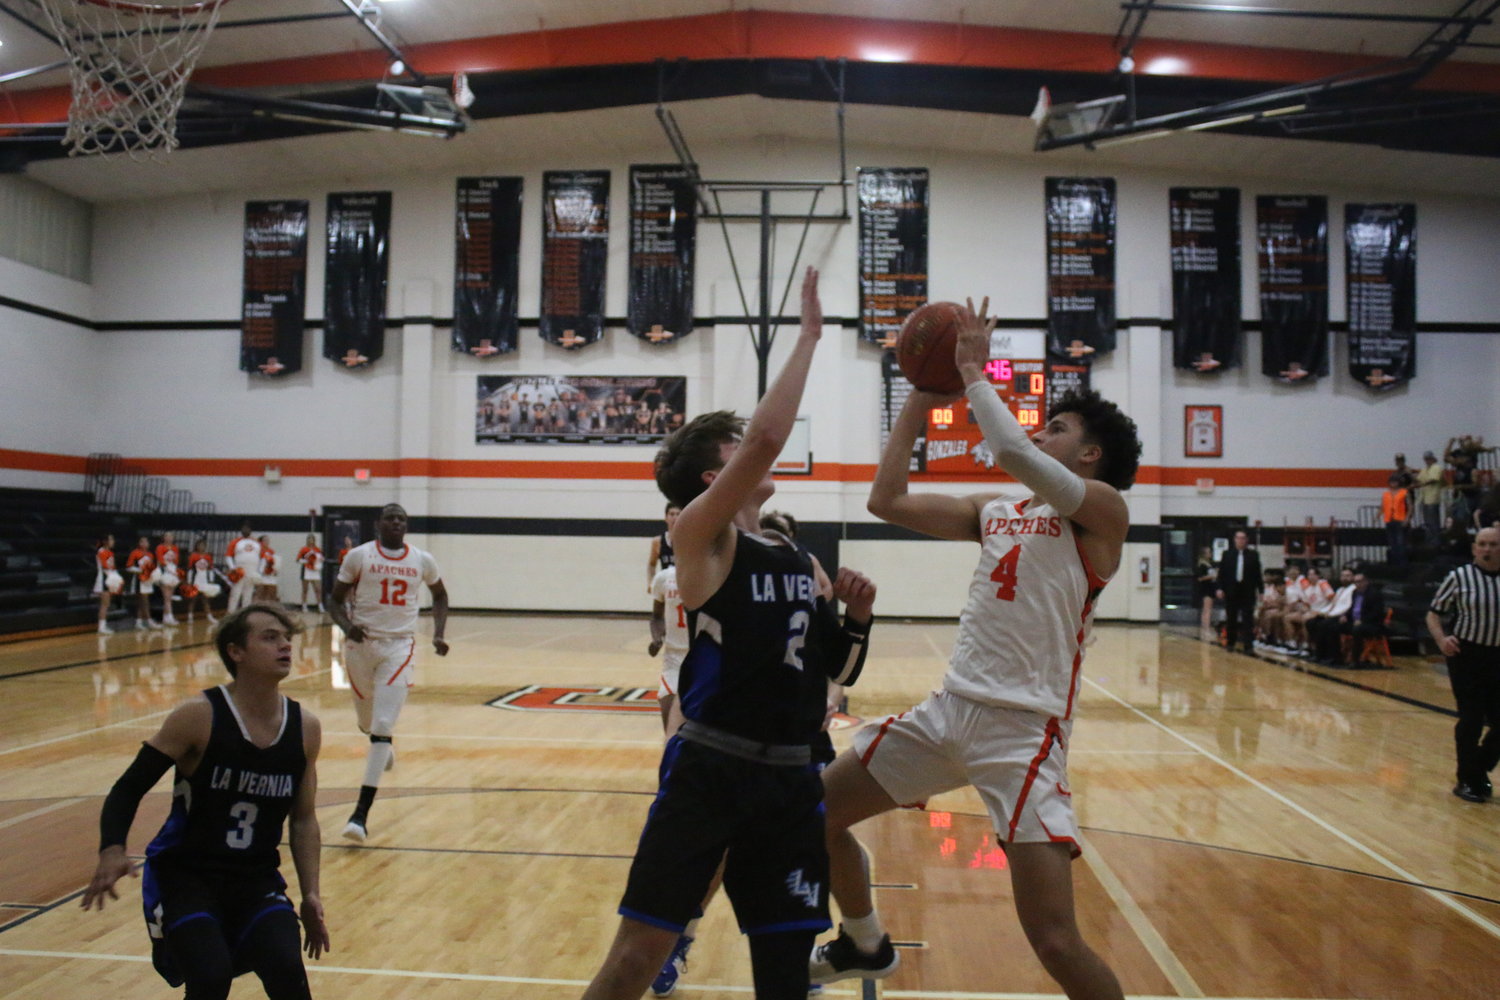 Angel Martinez goes up for a shot against La Vernia last week. Martinez scored 19 points against Navarro on Saturday as the Apaches won, 50-39.